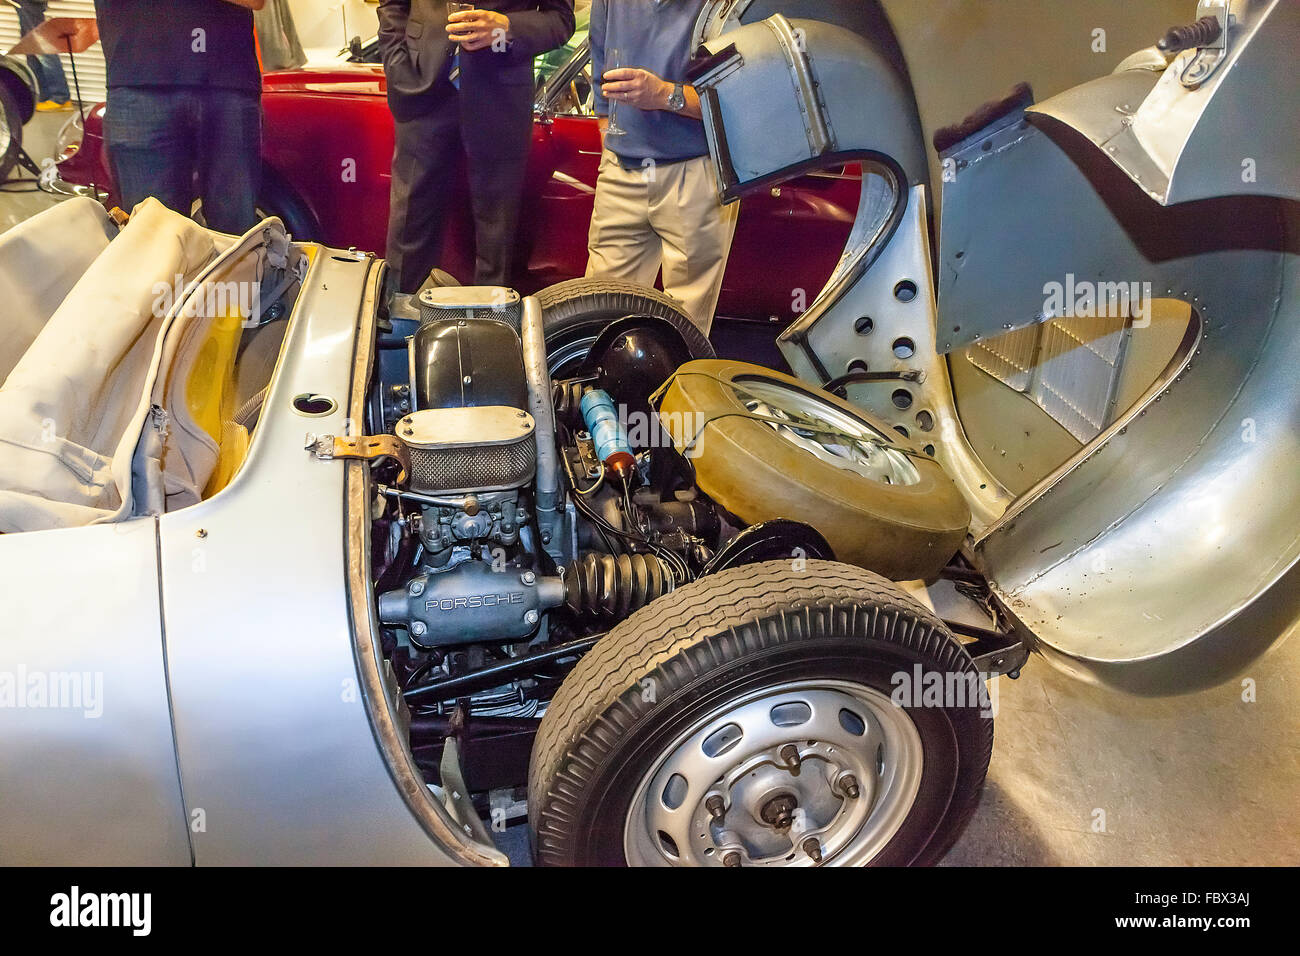 Engine compartment of the 1955 Porsche 550 RSK  similar to the car that James Dean crashed in 1955 Stock Photo